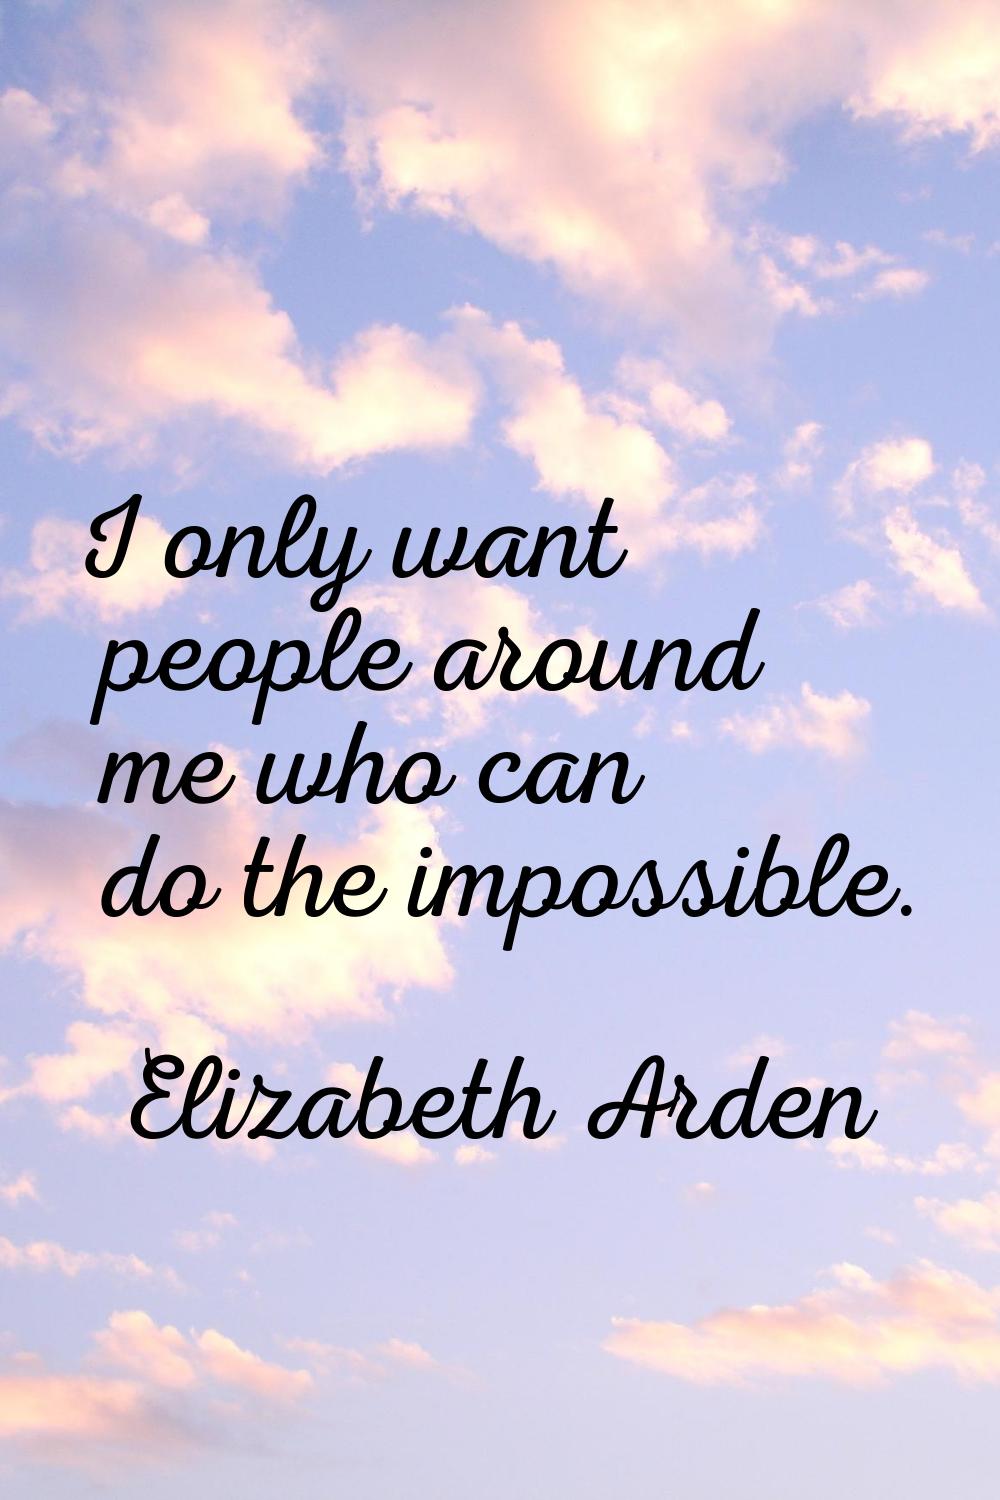 I only want people around me who can do the impossible.